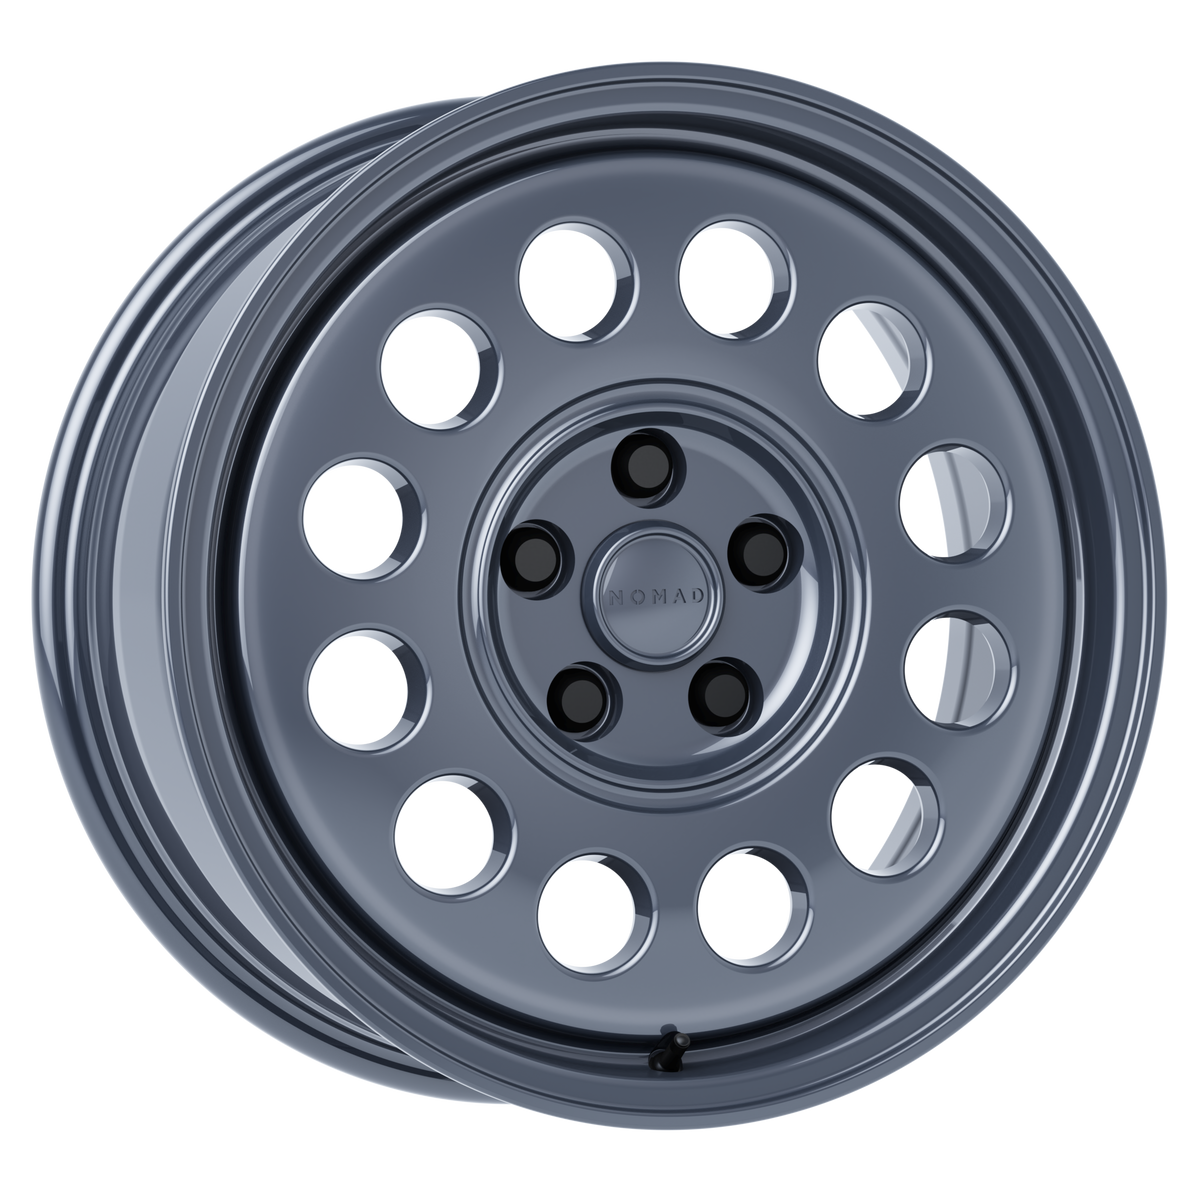 Accessory Left Wheel Right Wheel Drive Wheel For Conga 1790 For Useelife  1300